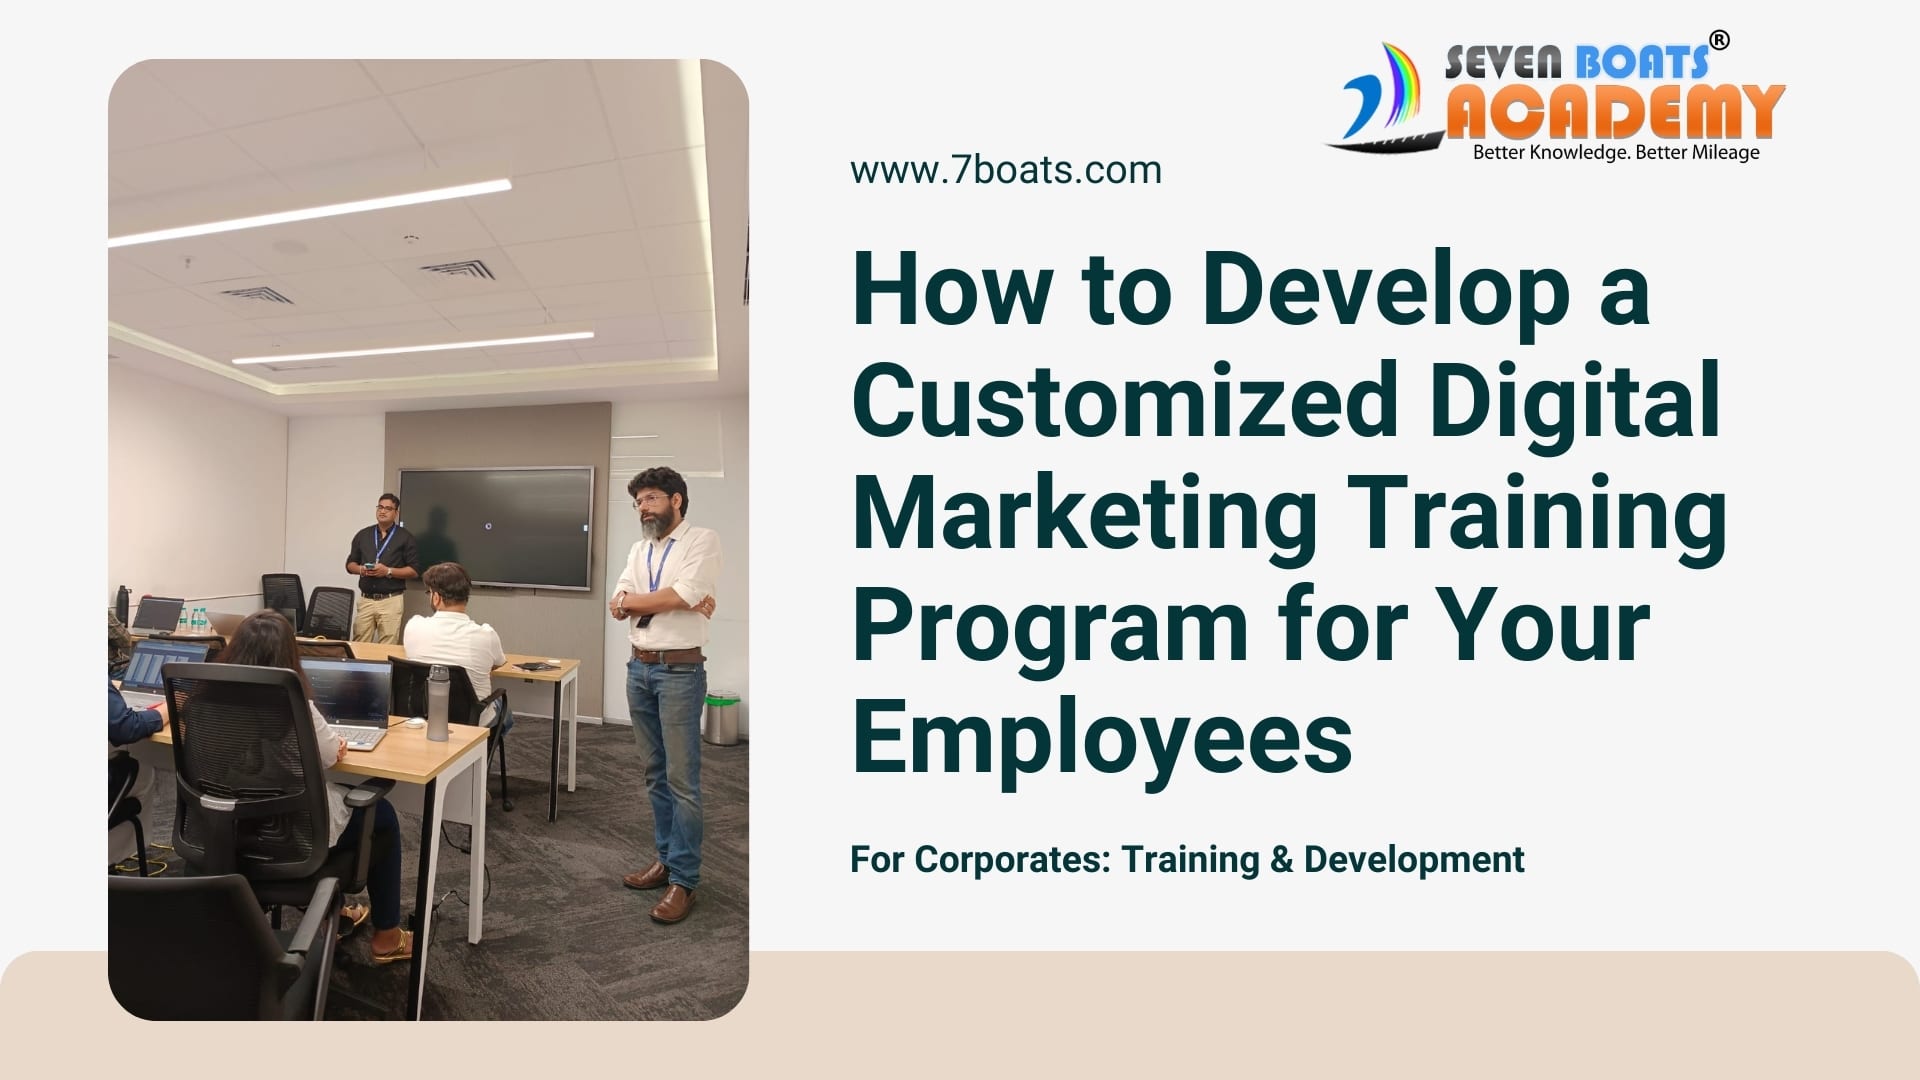 How to Develop a Customized Digital Marketing Training Program for Your Employees